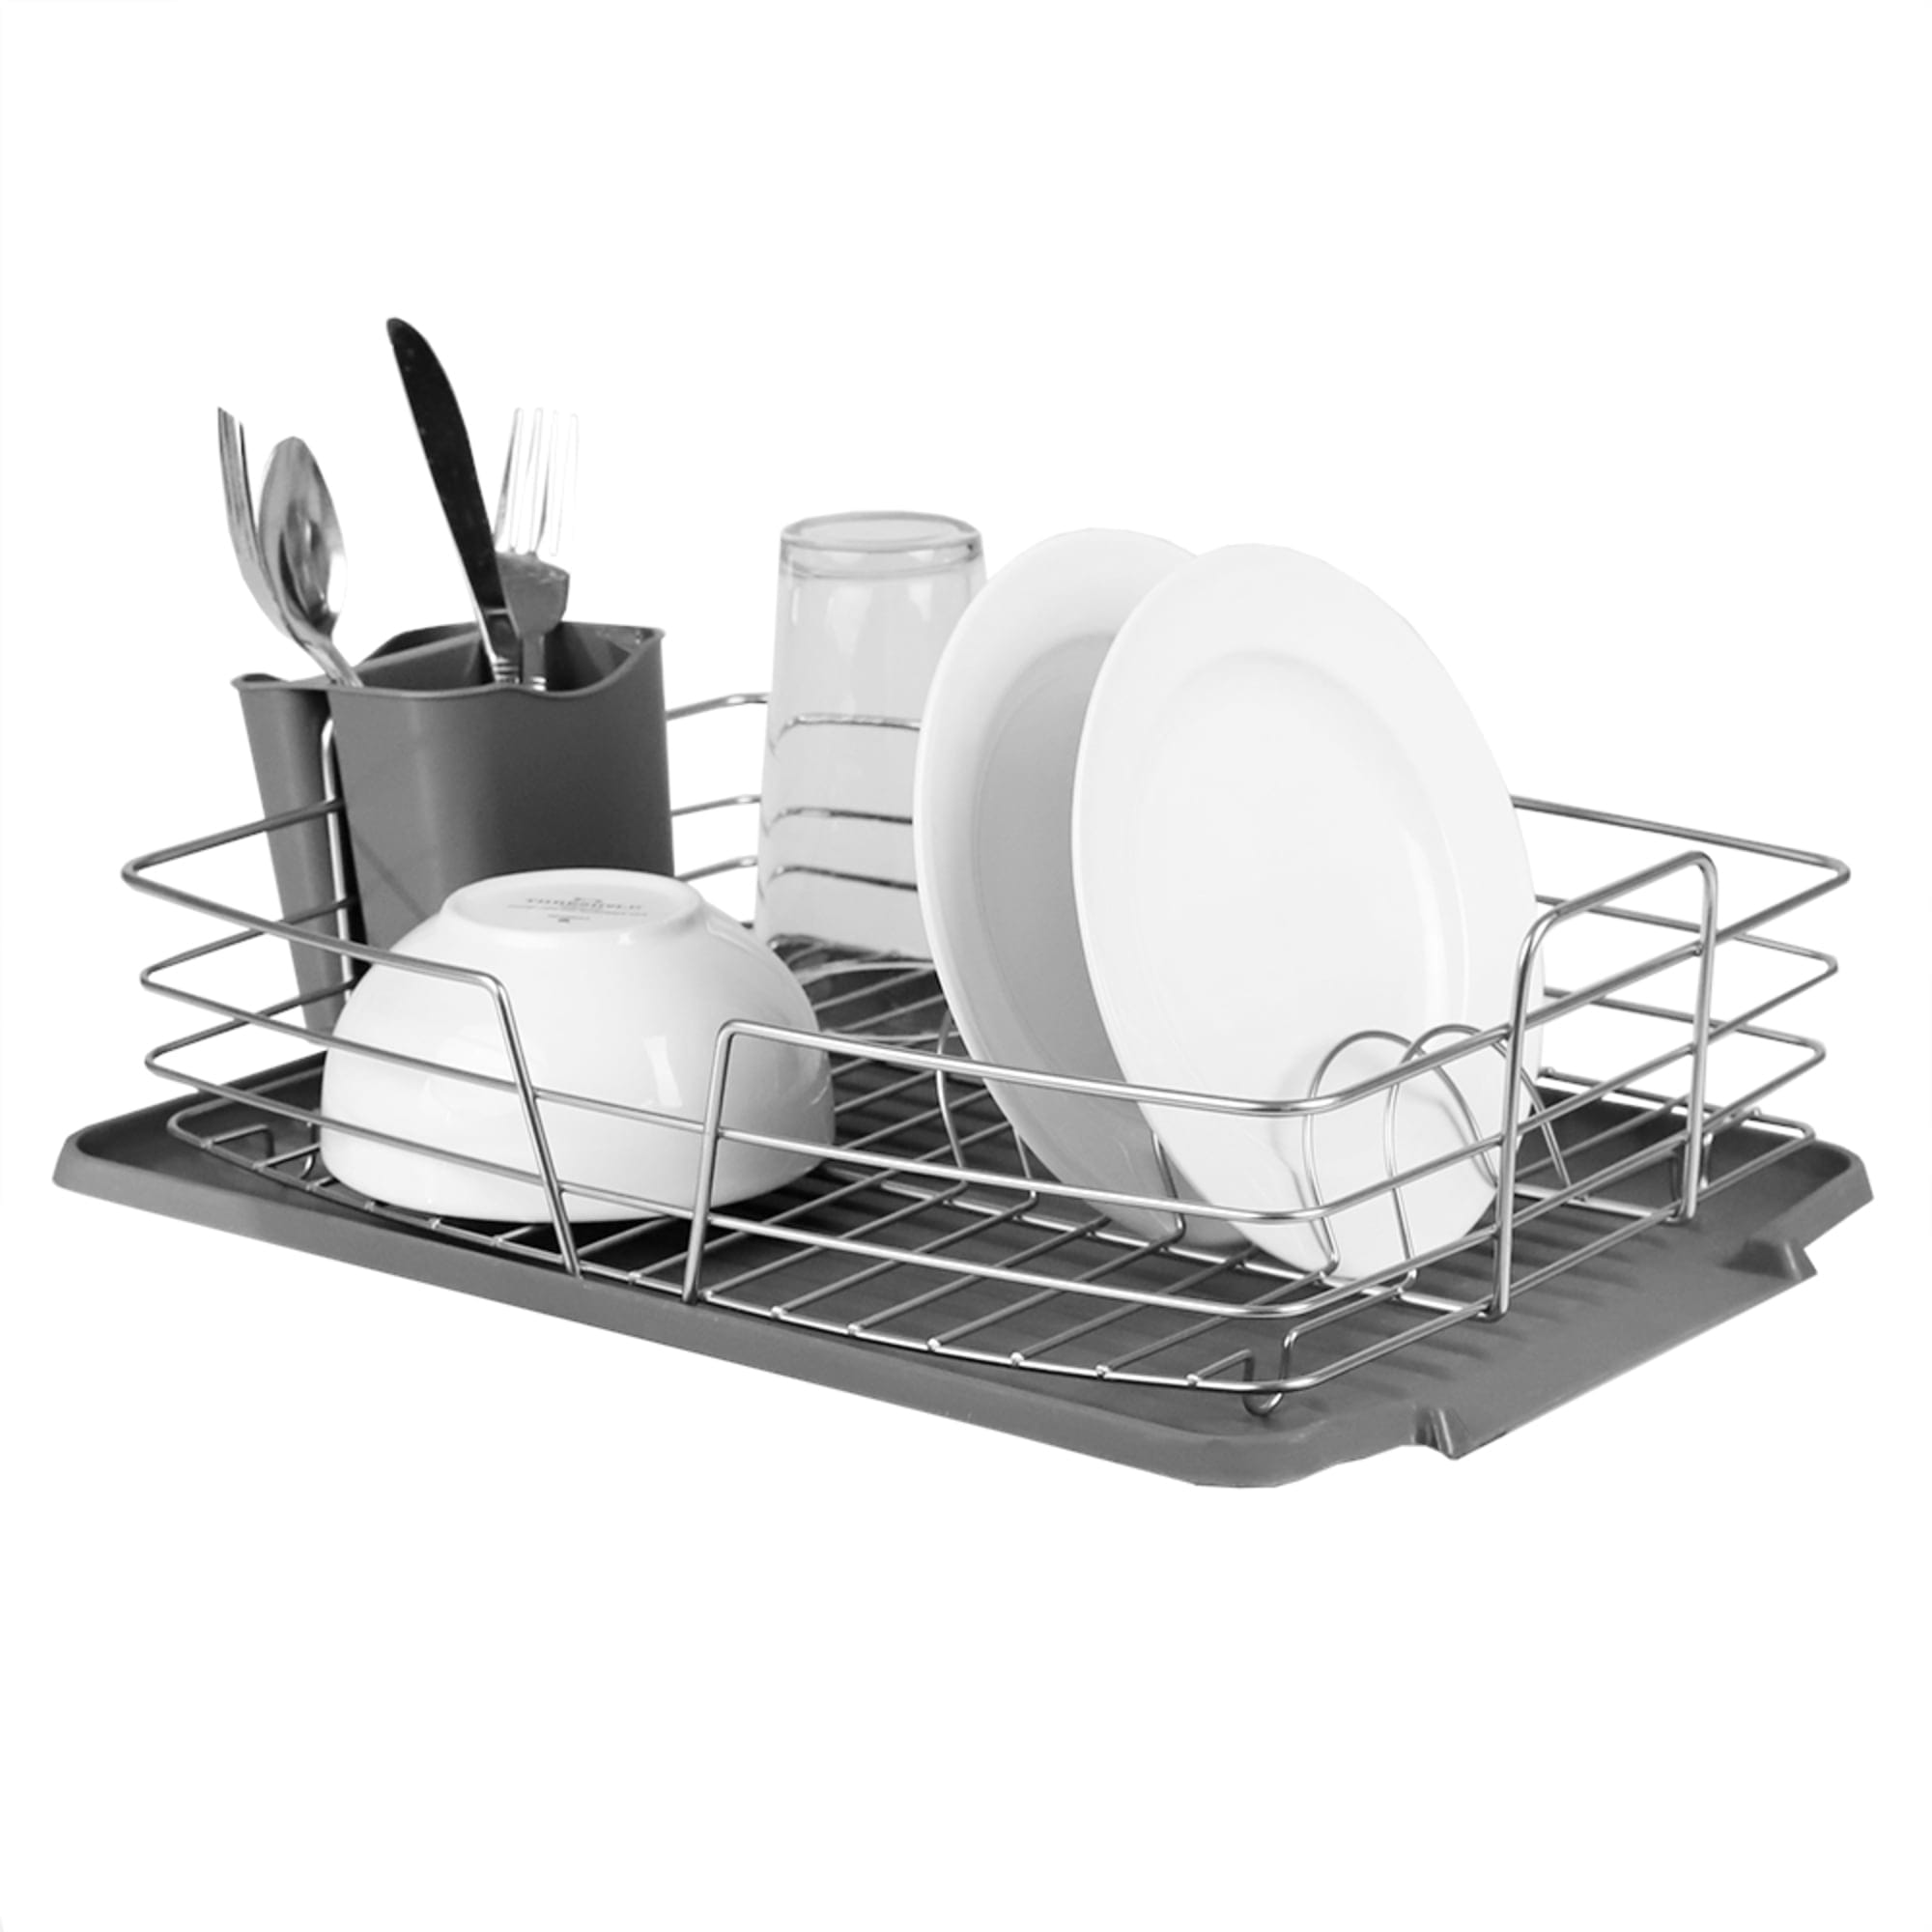 Michael Graves Design Deluxe Dish Rack with Satin Nickel Finish Wire and Removable Dual Compartment Utensil Holder, Grey/Silver $12.00 EACH, CASE PACK OF 6